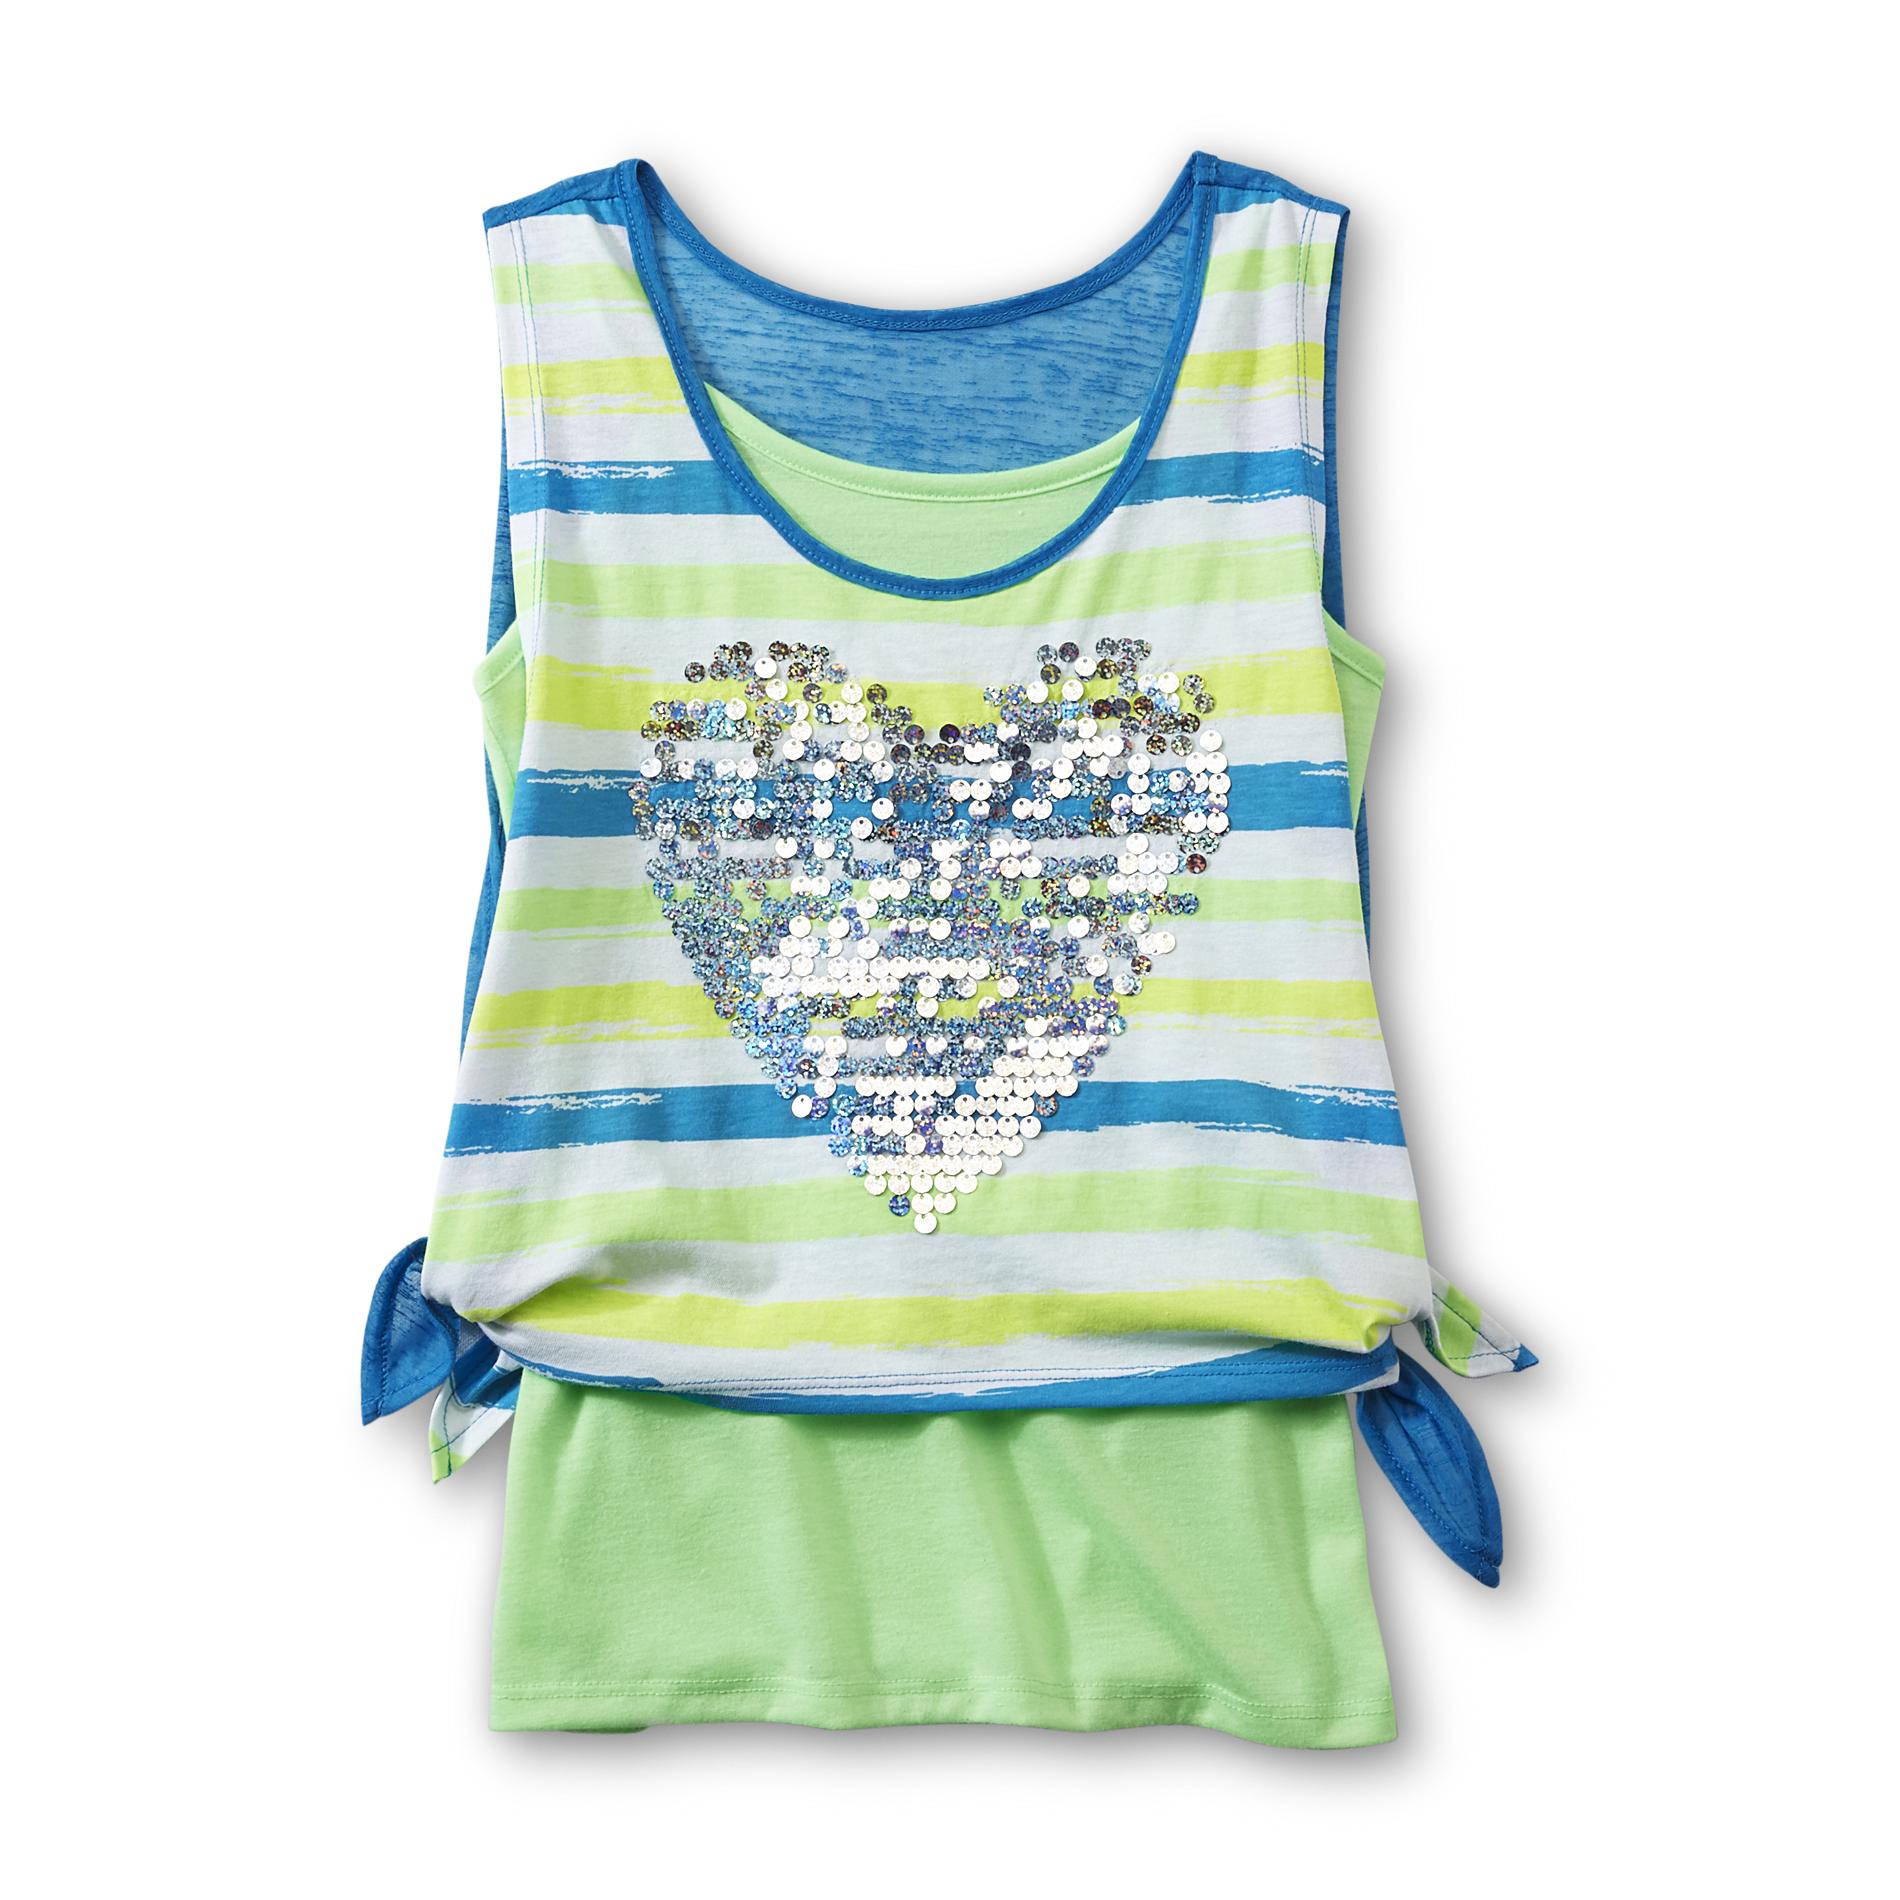 Piper Girl's Crop Top & Camisole - Sequined Heart